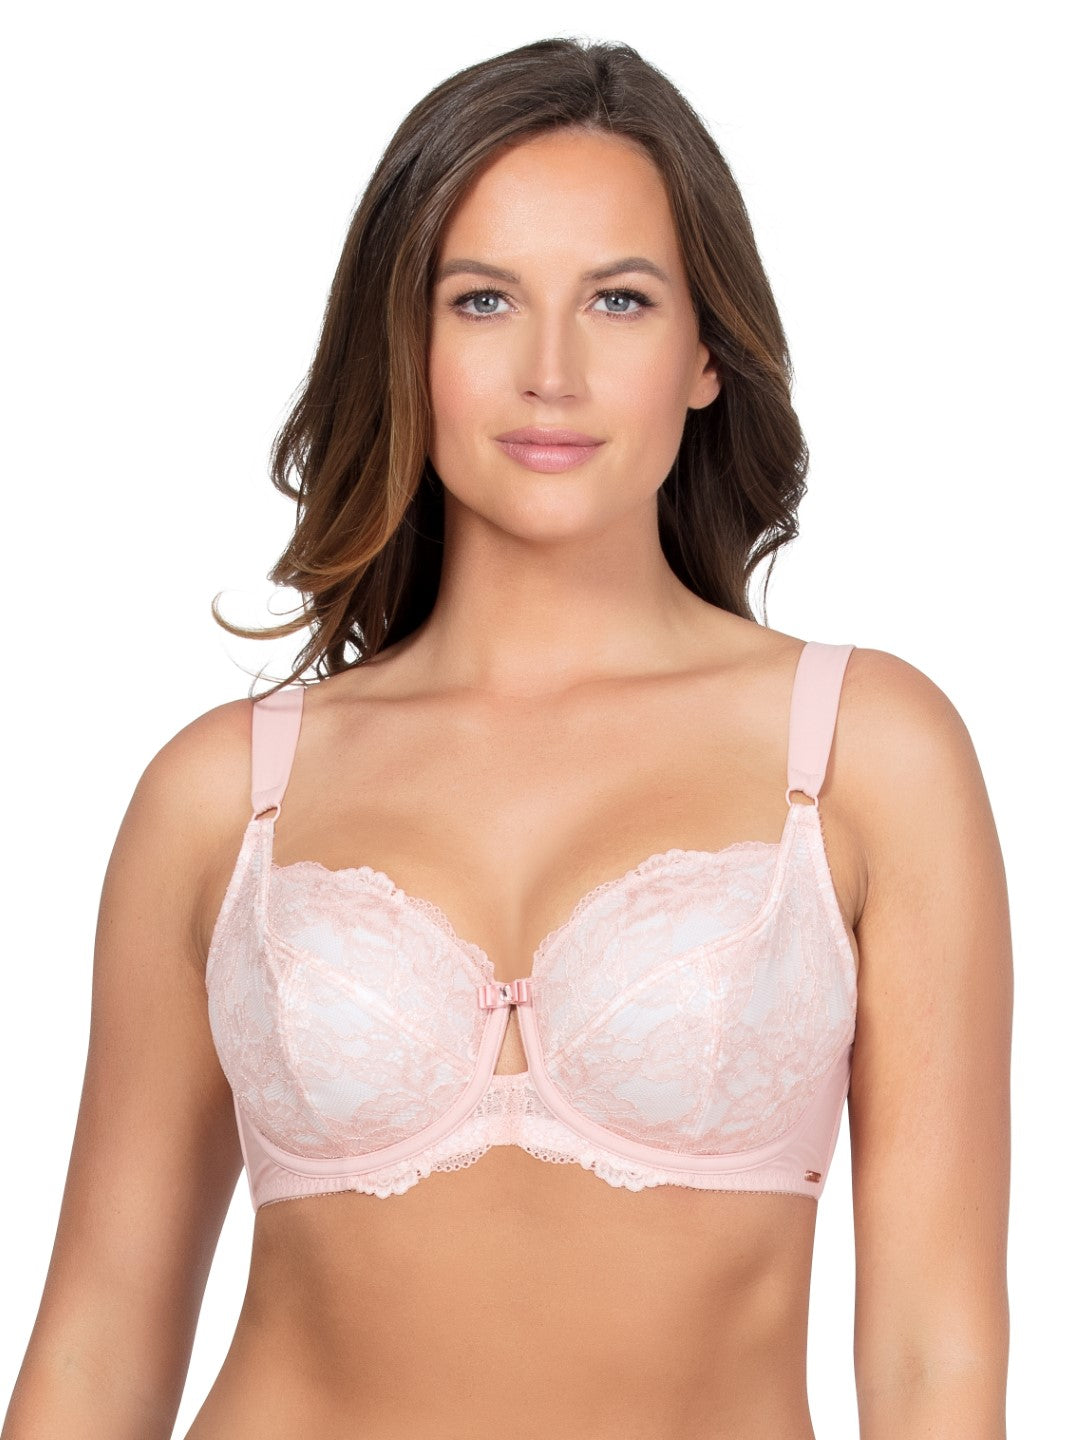 Buy Parfait Marion Unlined Wire Bra Style Number-P5392 - Black